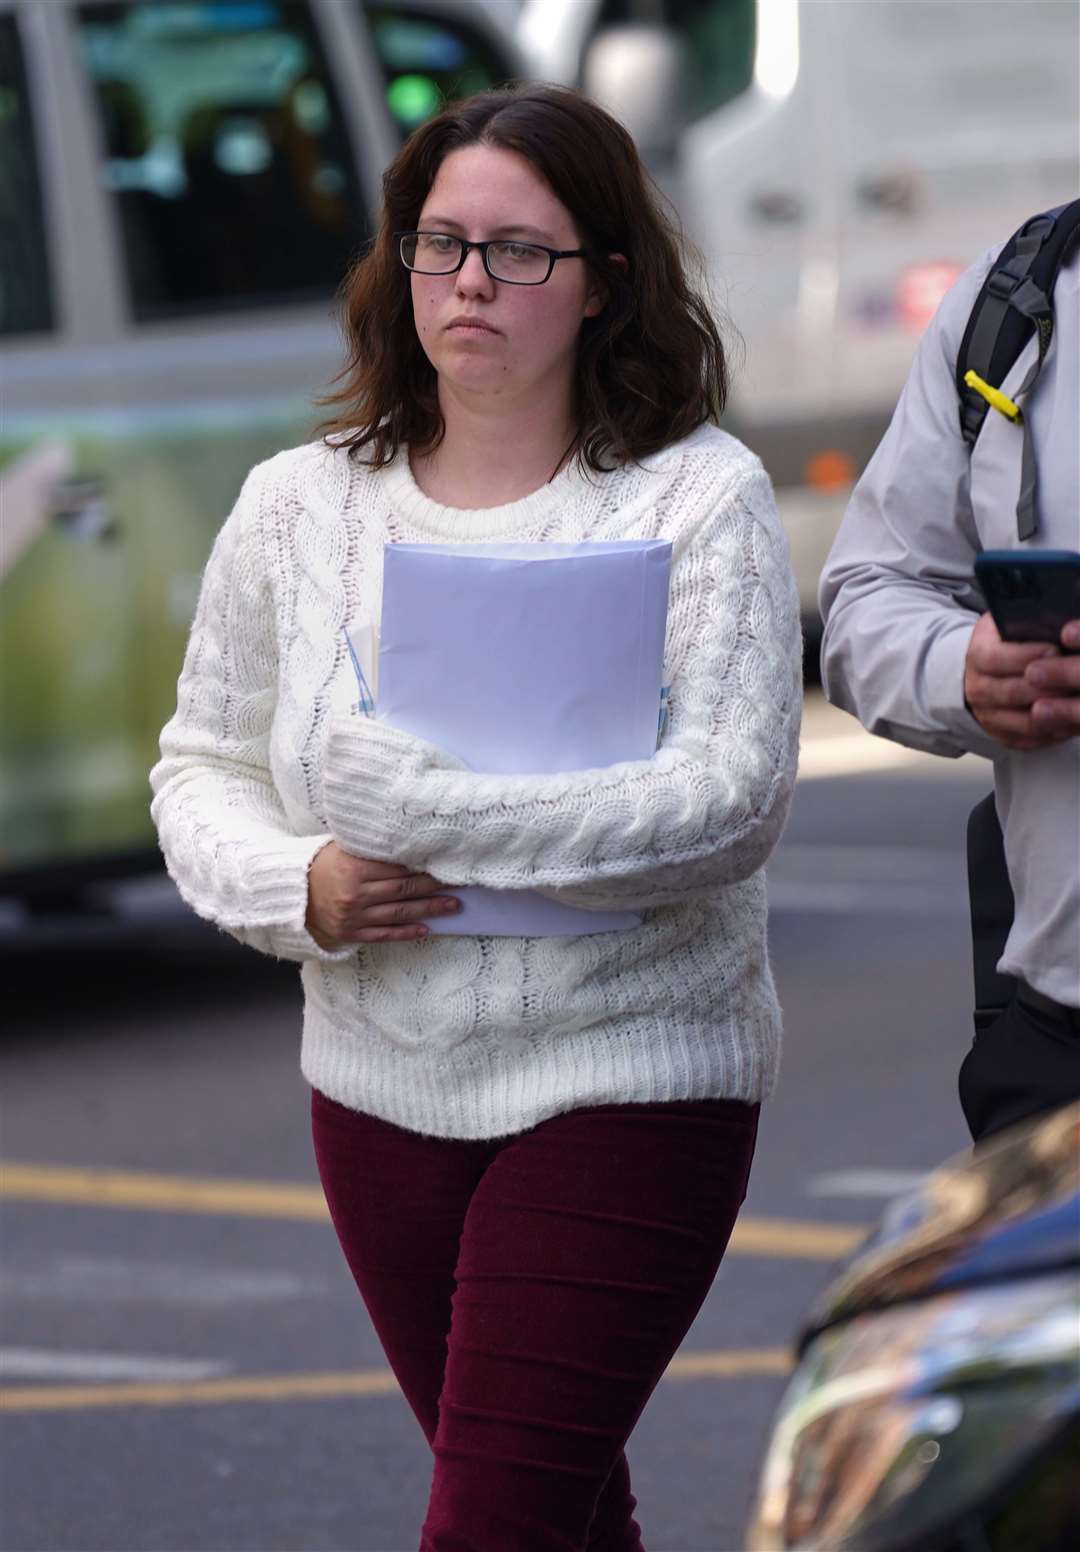 Mikayla Hayes wanted her trial to take place in the US (Yui Mok/PA)